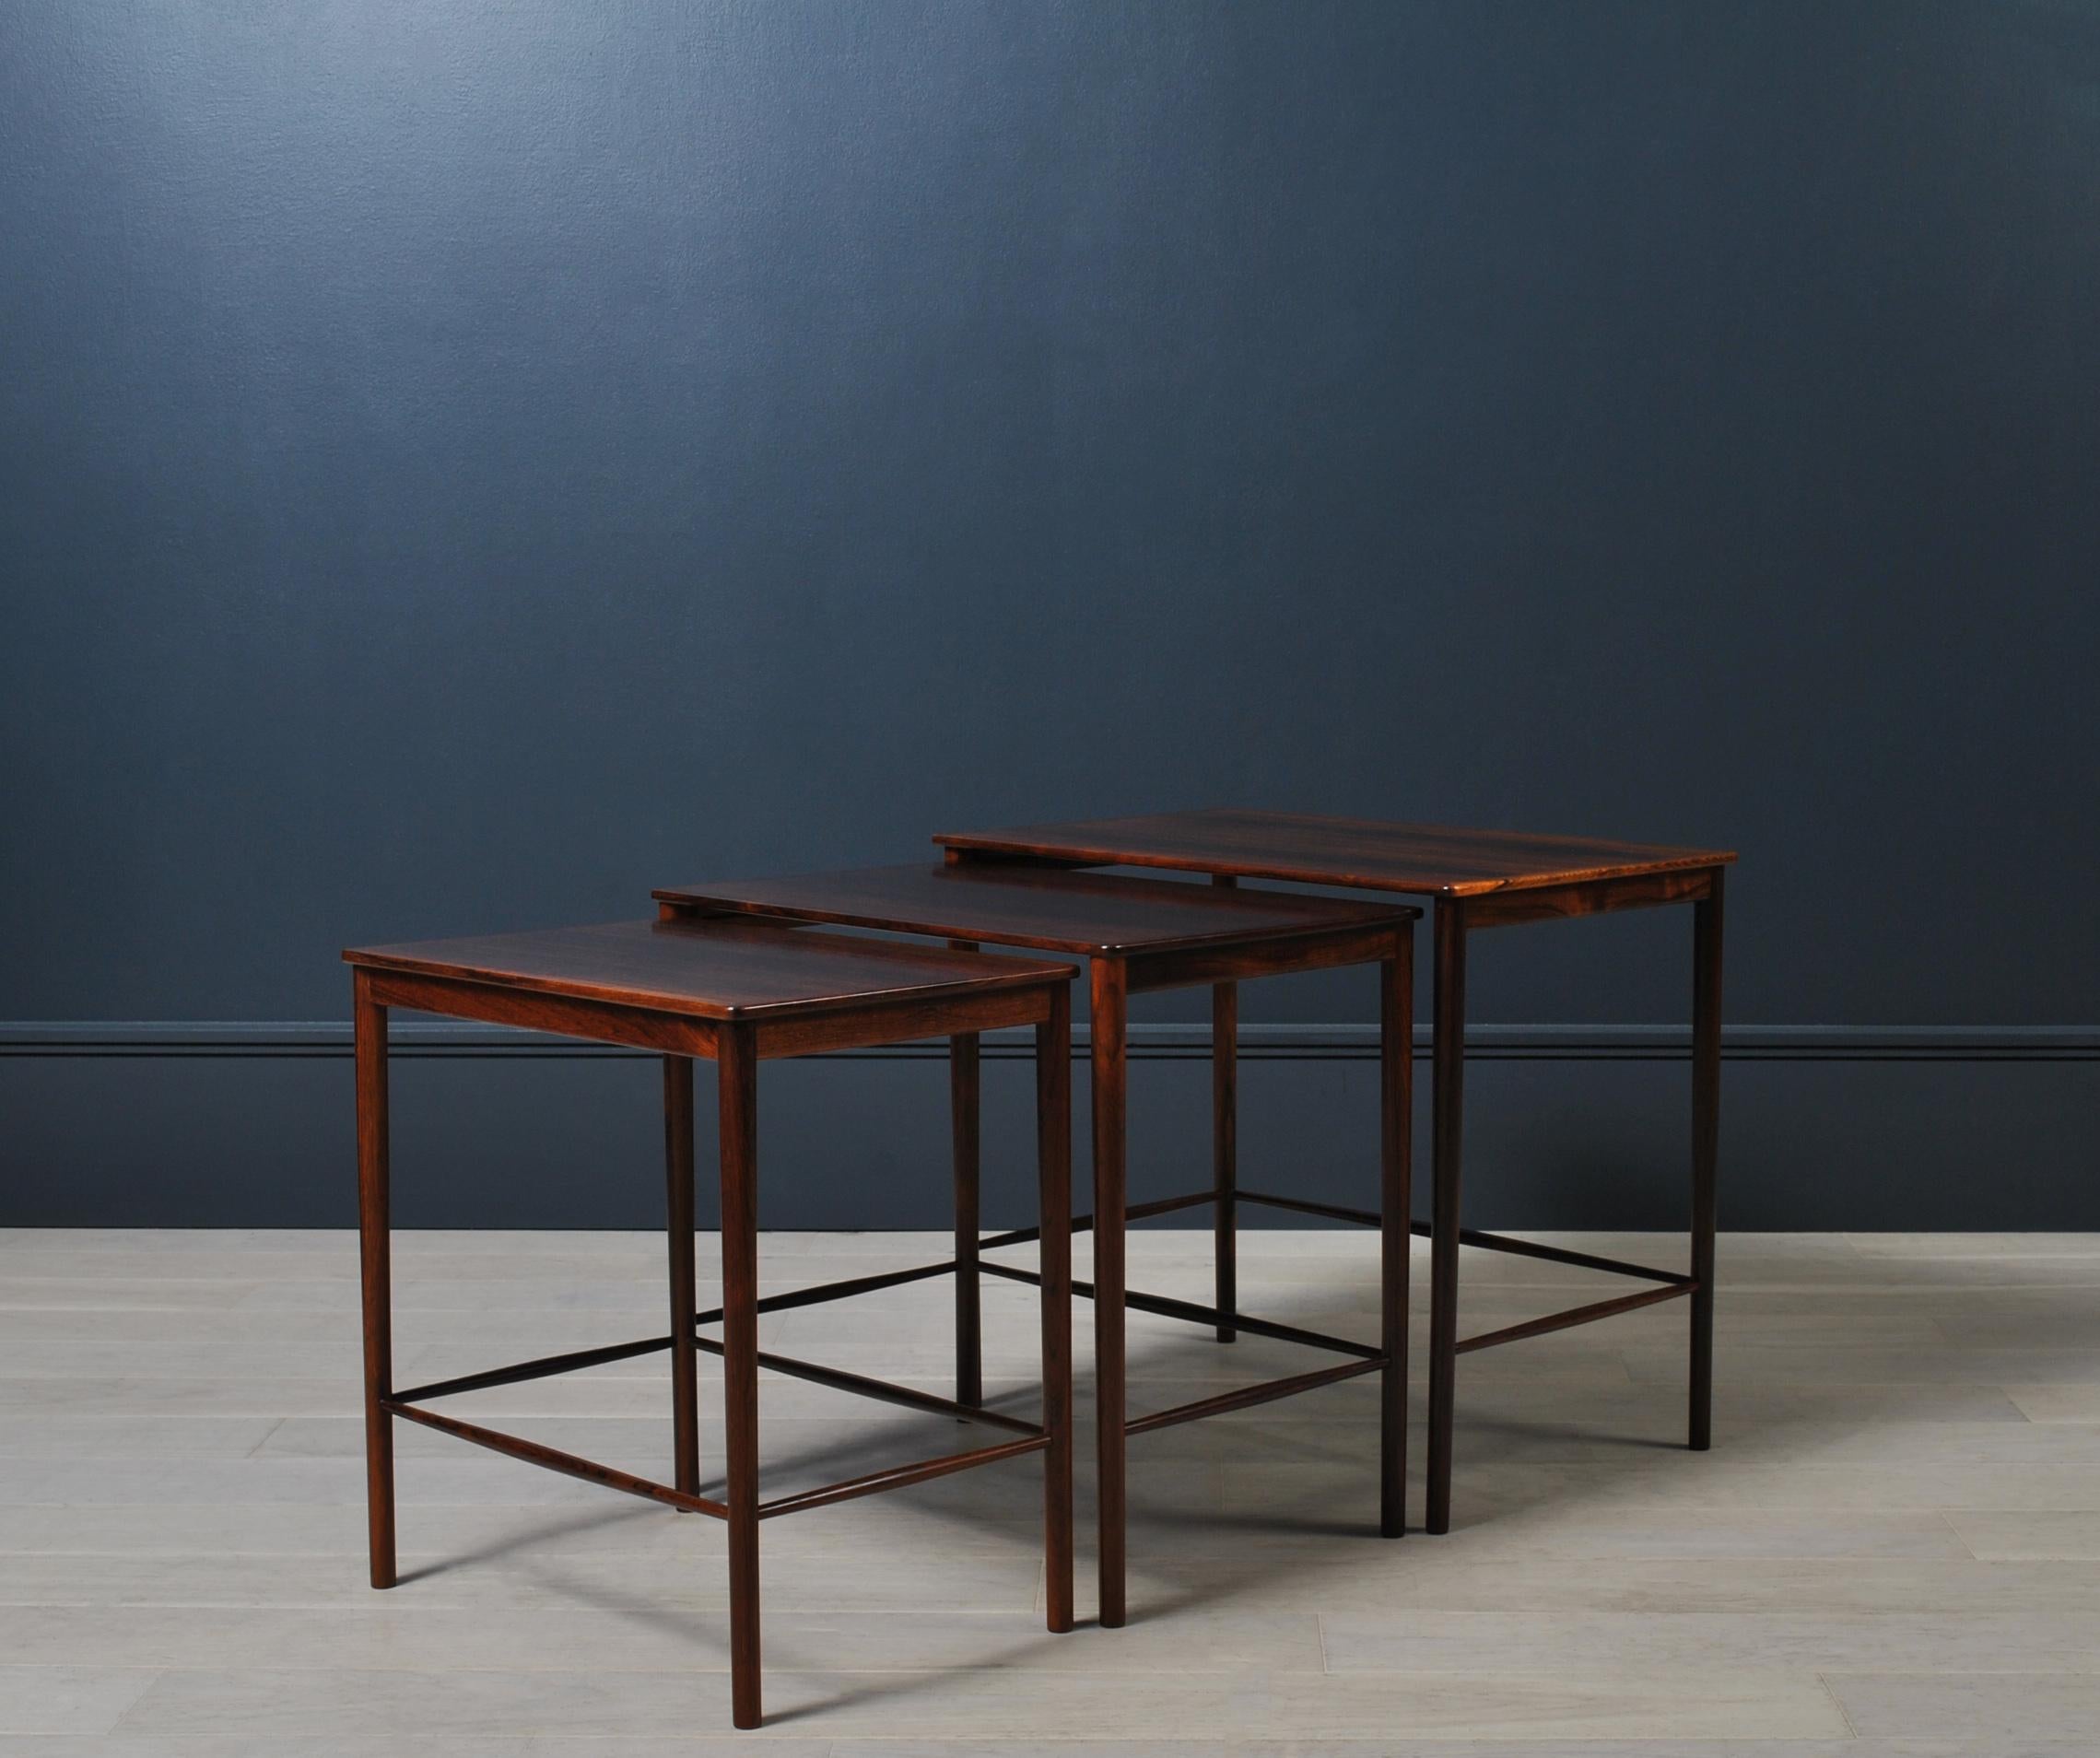 An incredible set of nesting tables designed by Grete Jalk for Poul Jeppesen. Produced by P Jeppesen in Denmark during the 1950’s. The subtlety and expertise within the design and execution is truly wonderful to see. 
A very fine piece of furniture